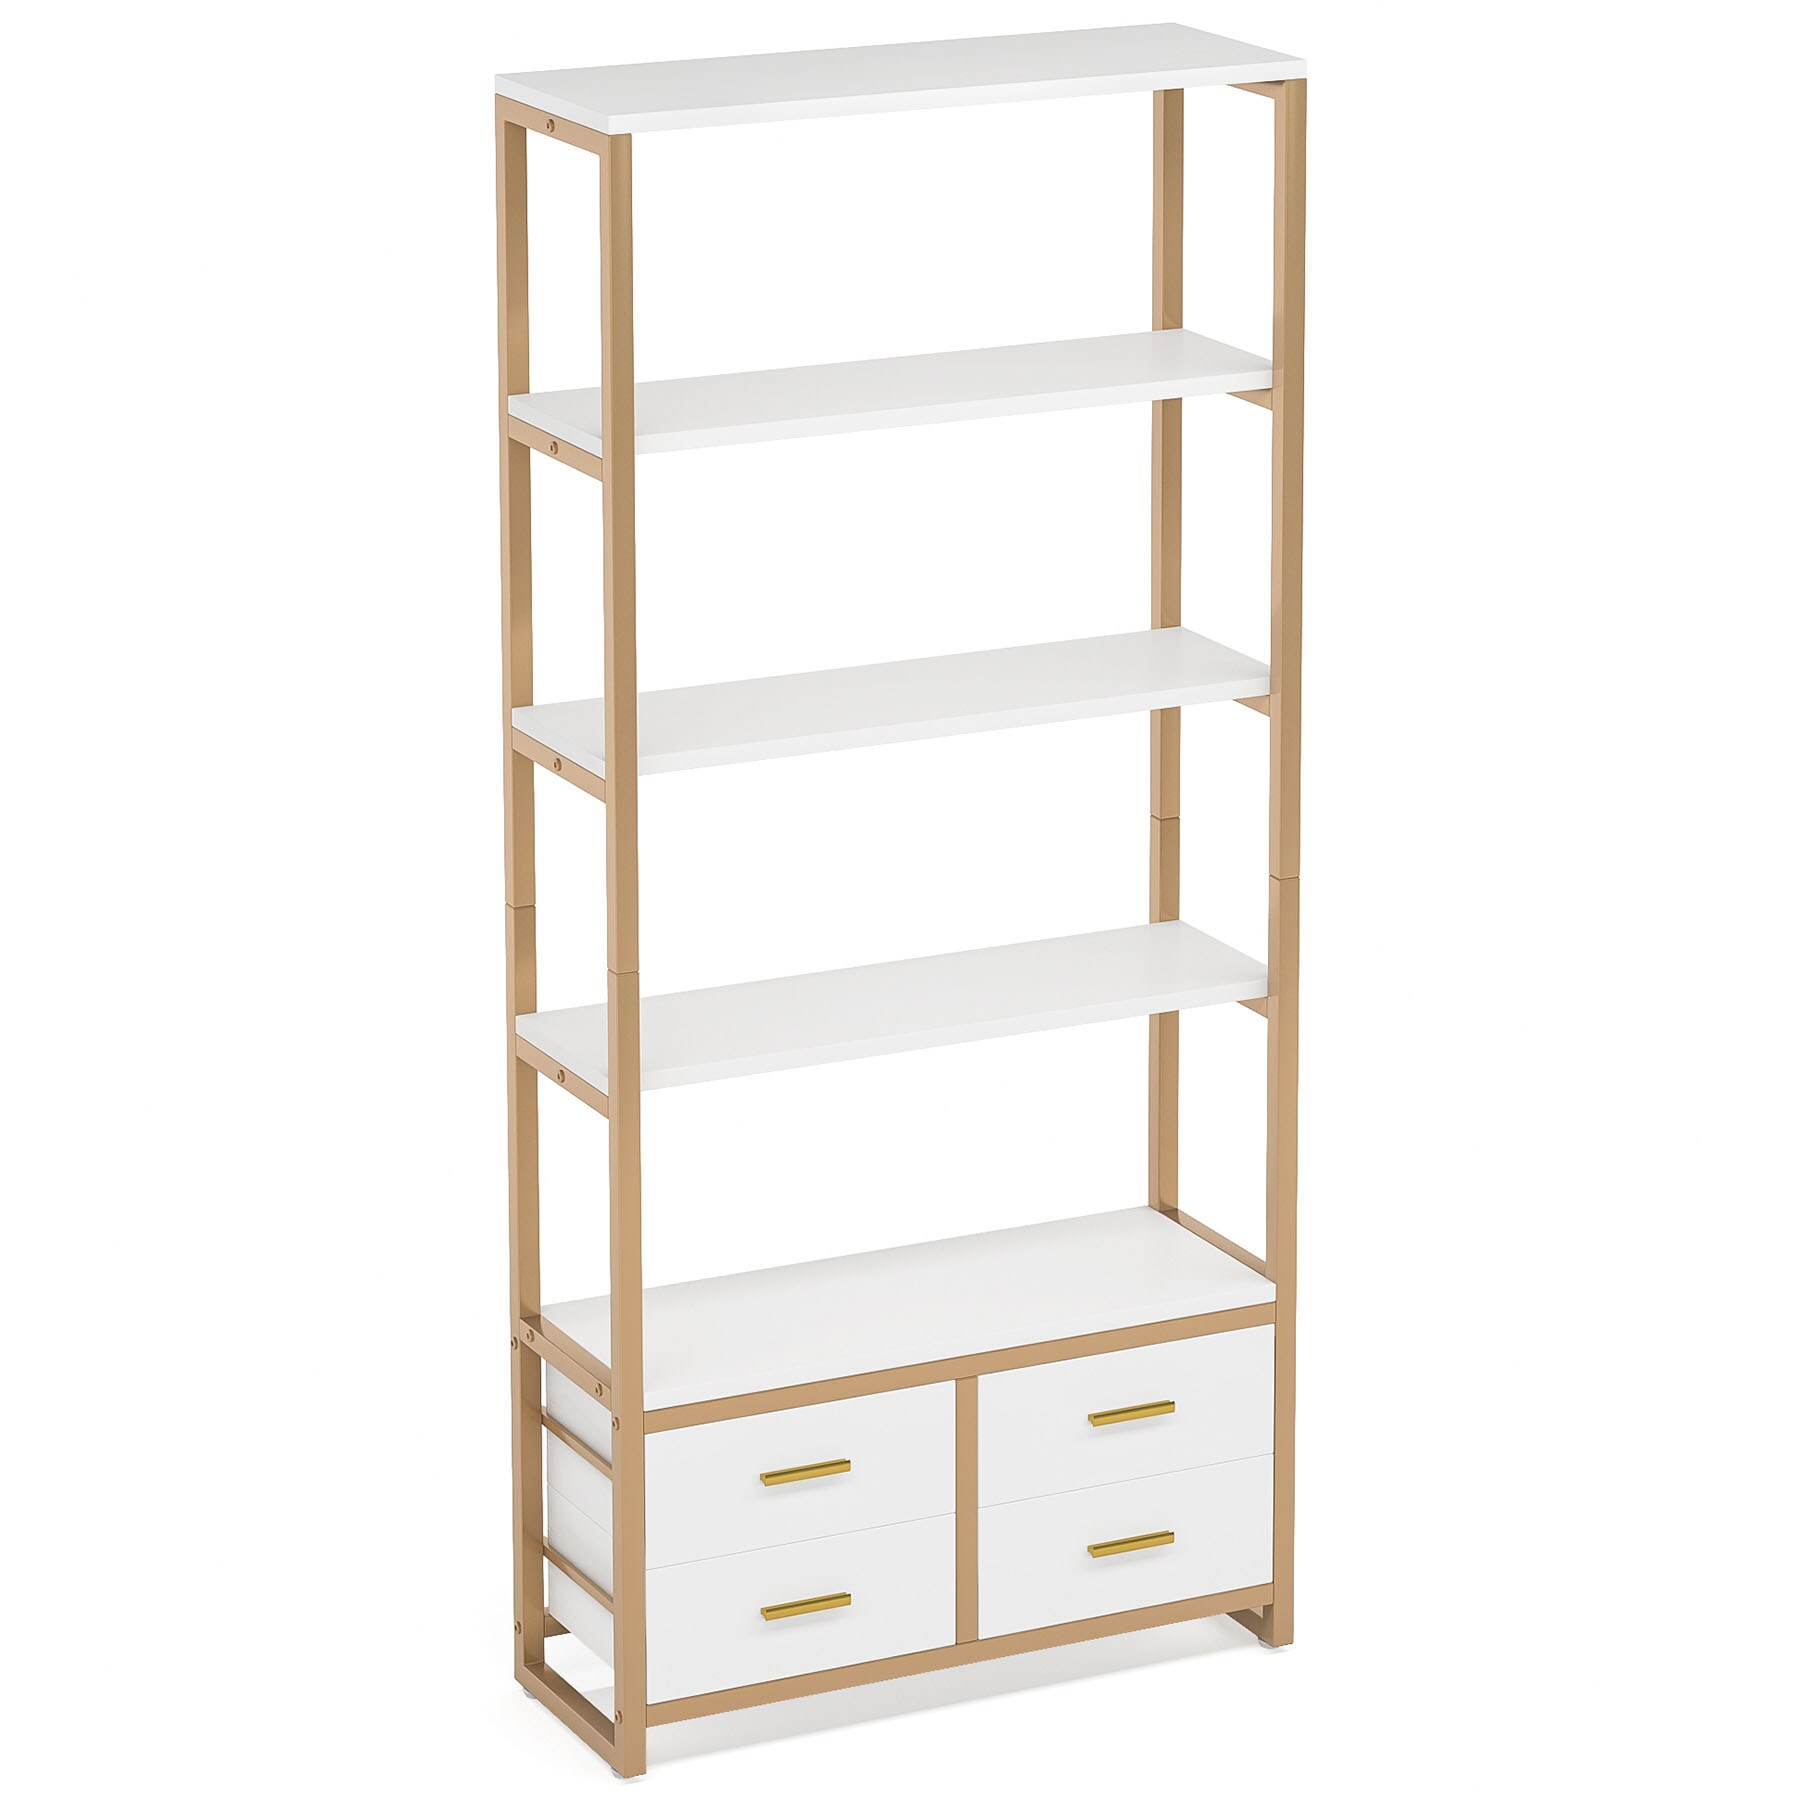 Tribesigns Tribesigns Bookcase Is Designed to Be Space Efficient While Providing You with The Storage That You Need. This Single Unit, The 72 Inches